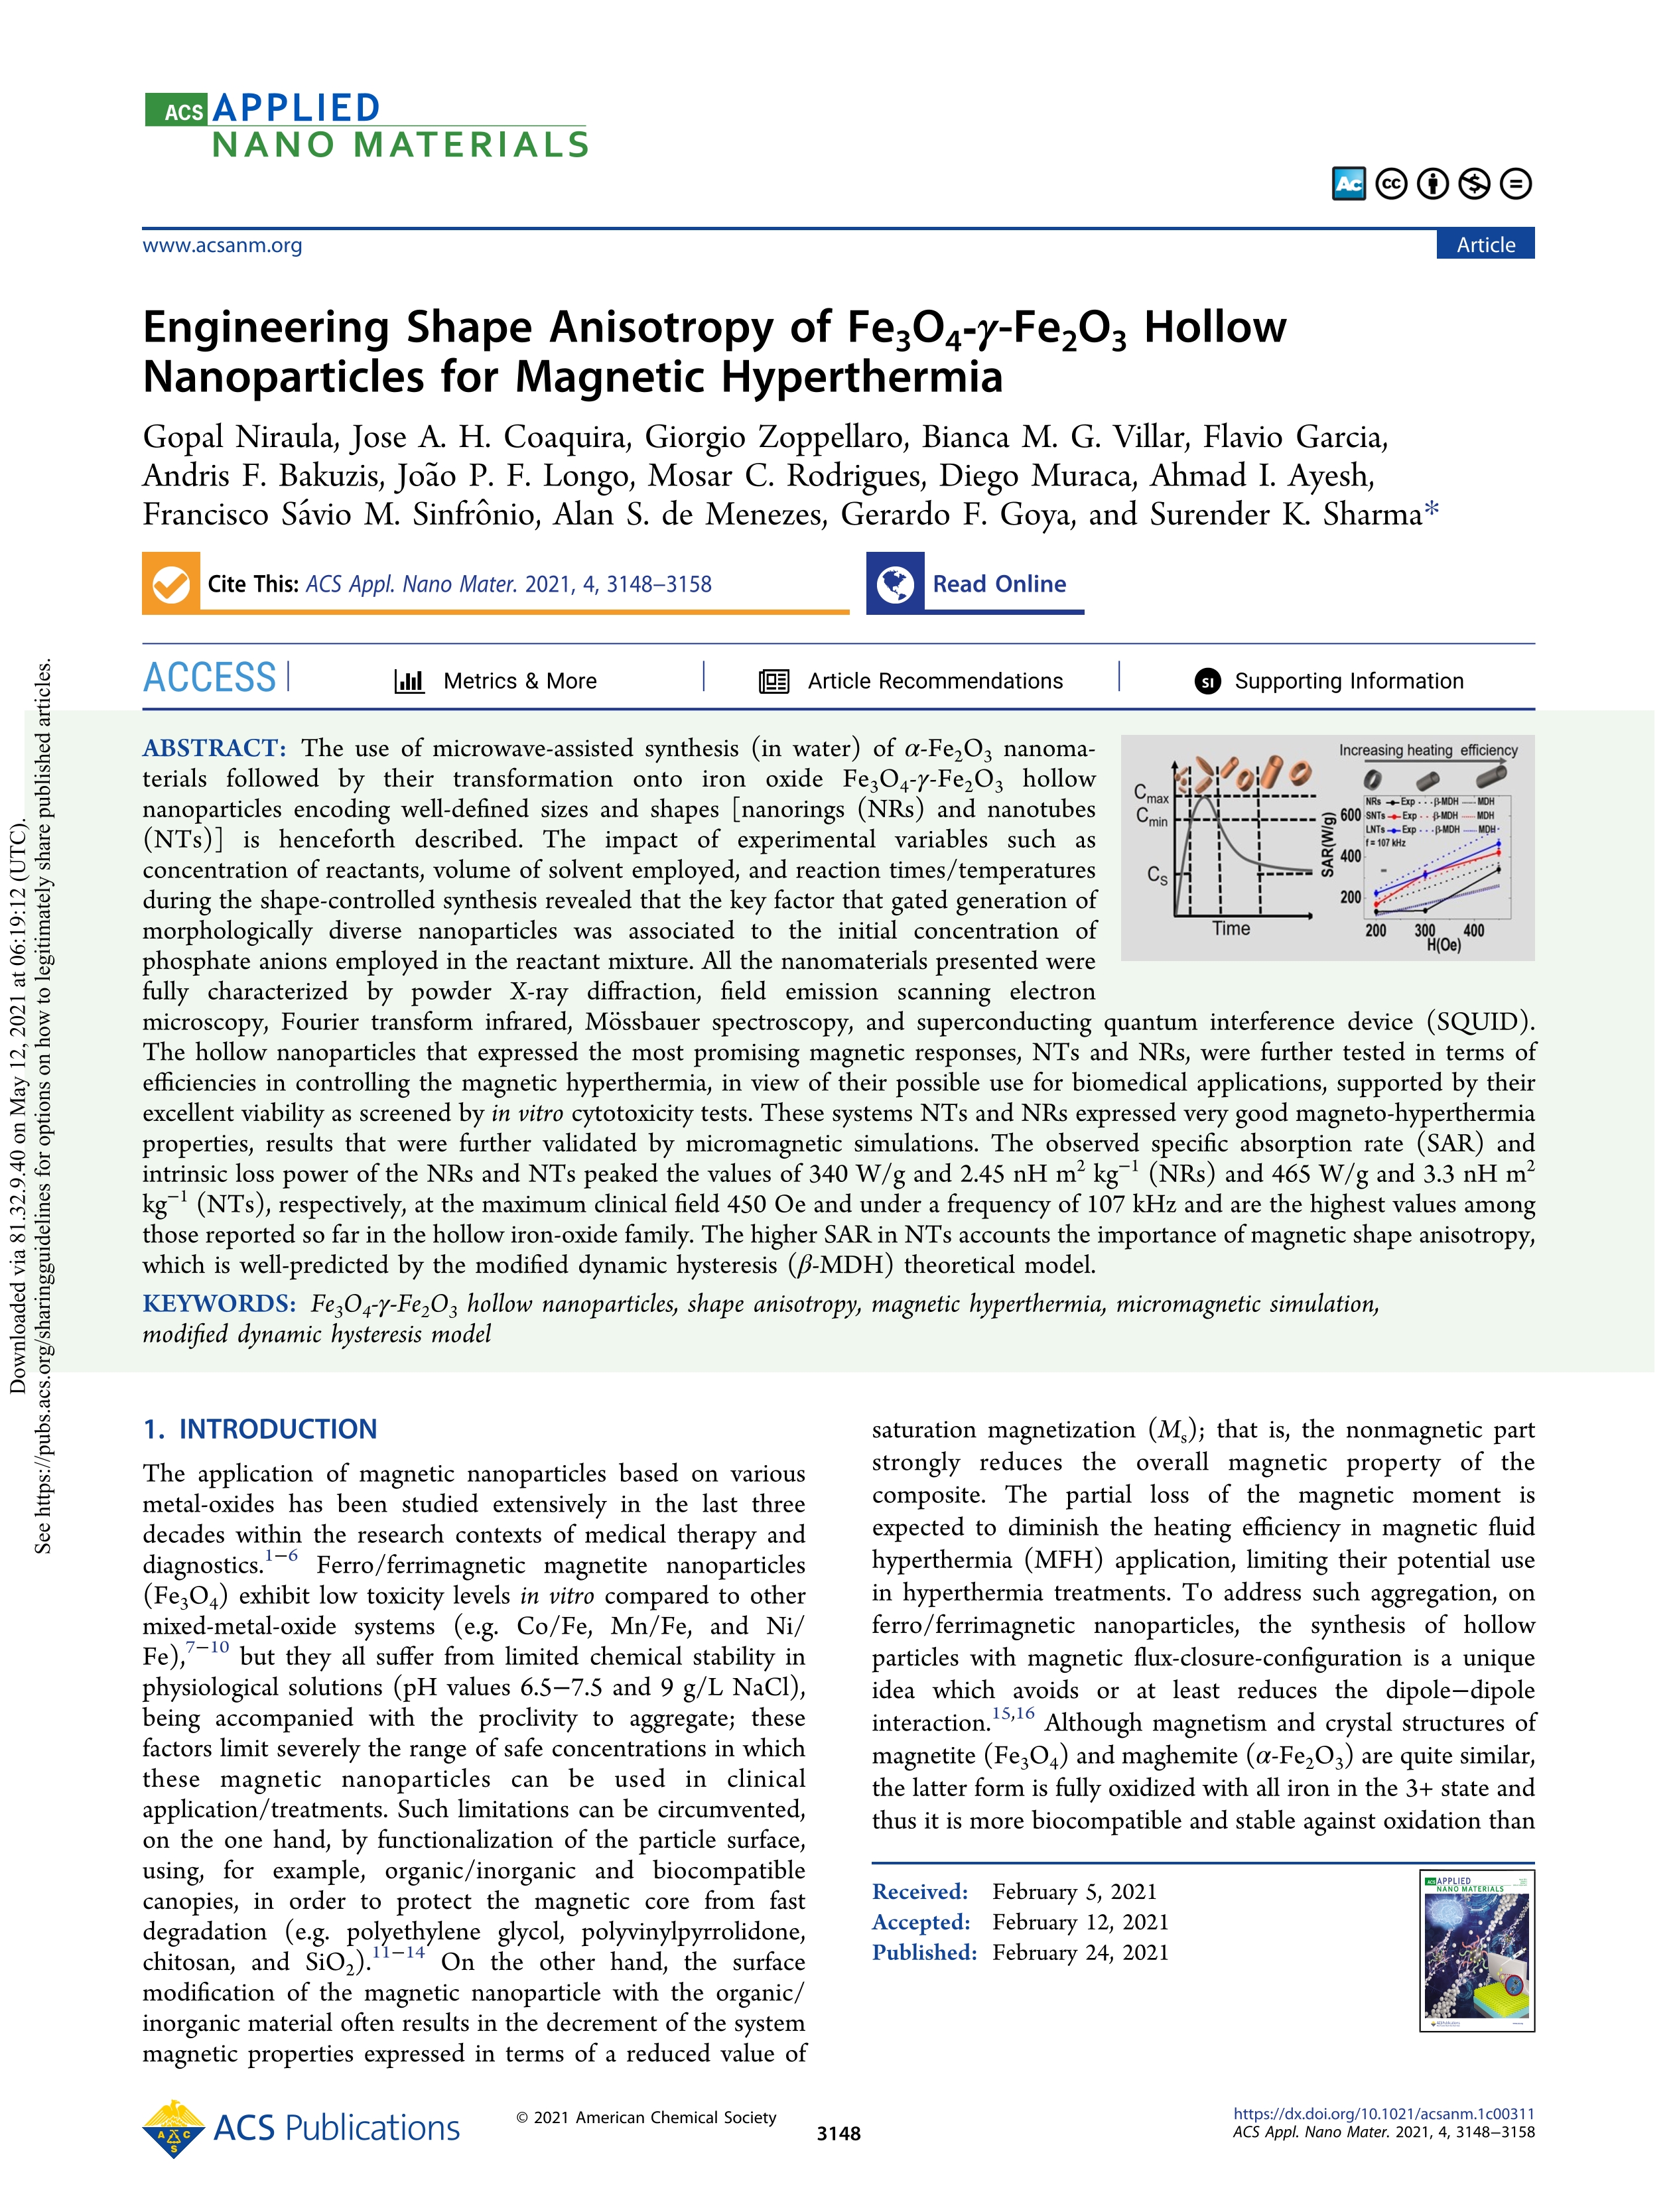 Engineering Shape Anisotropy Of Fe3o4 G Fe2o3 Hollow Nanoparticles For Magnetic Hyperthermia